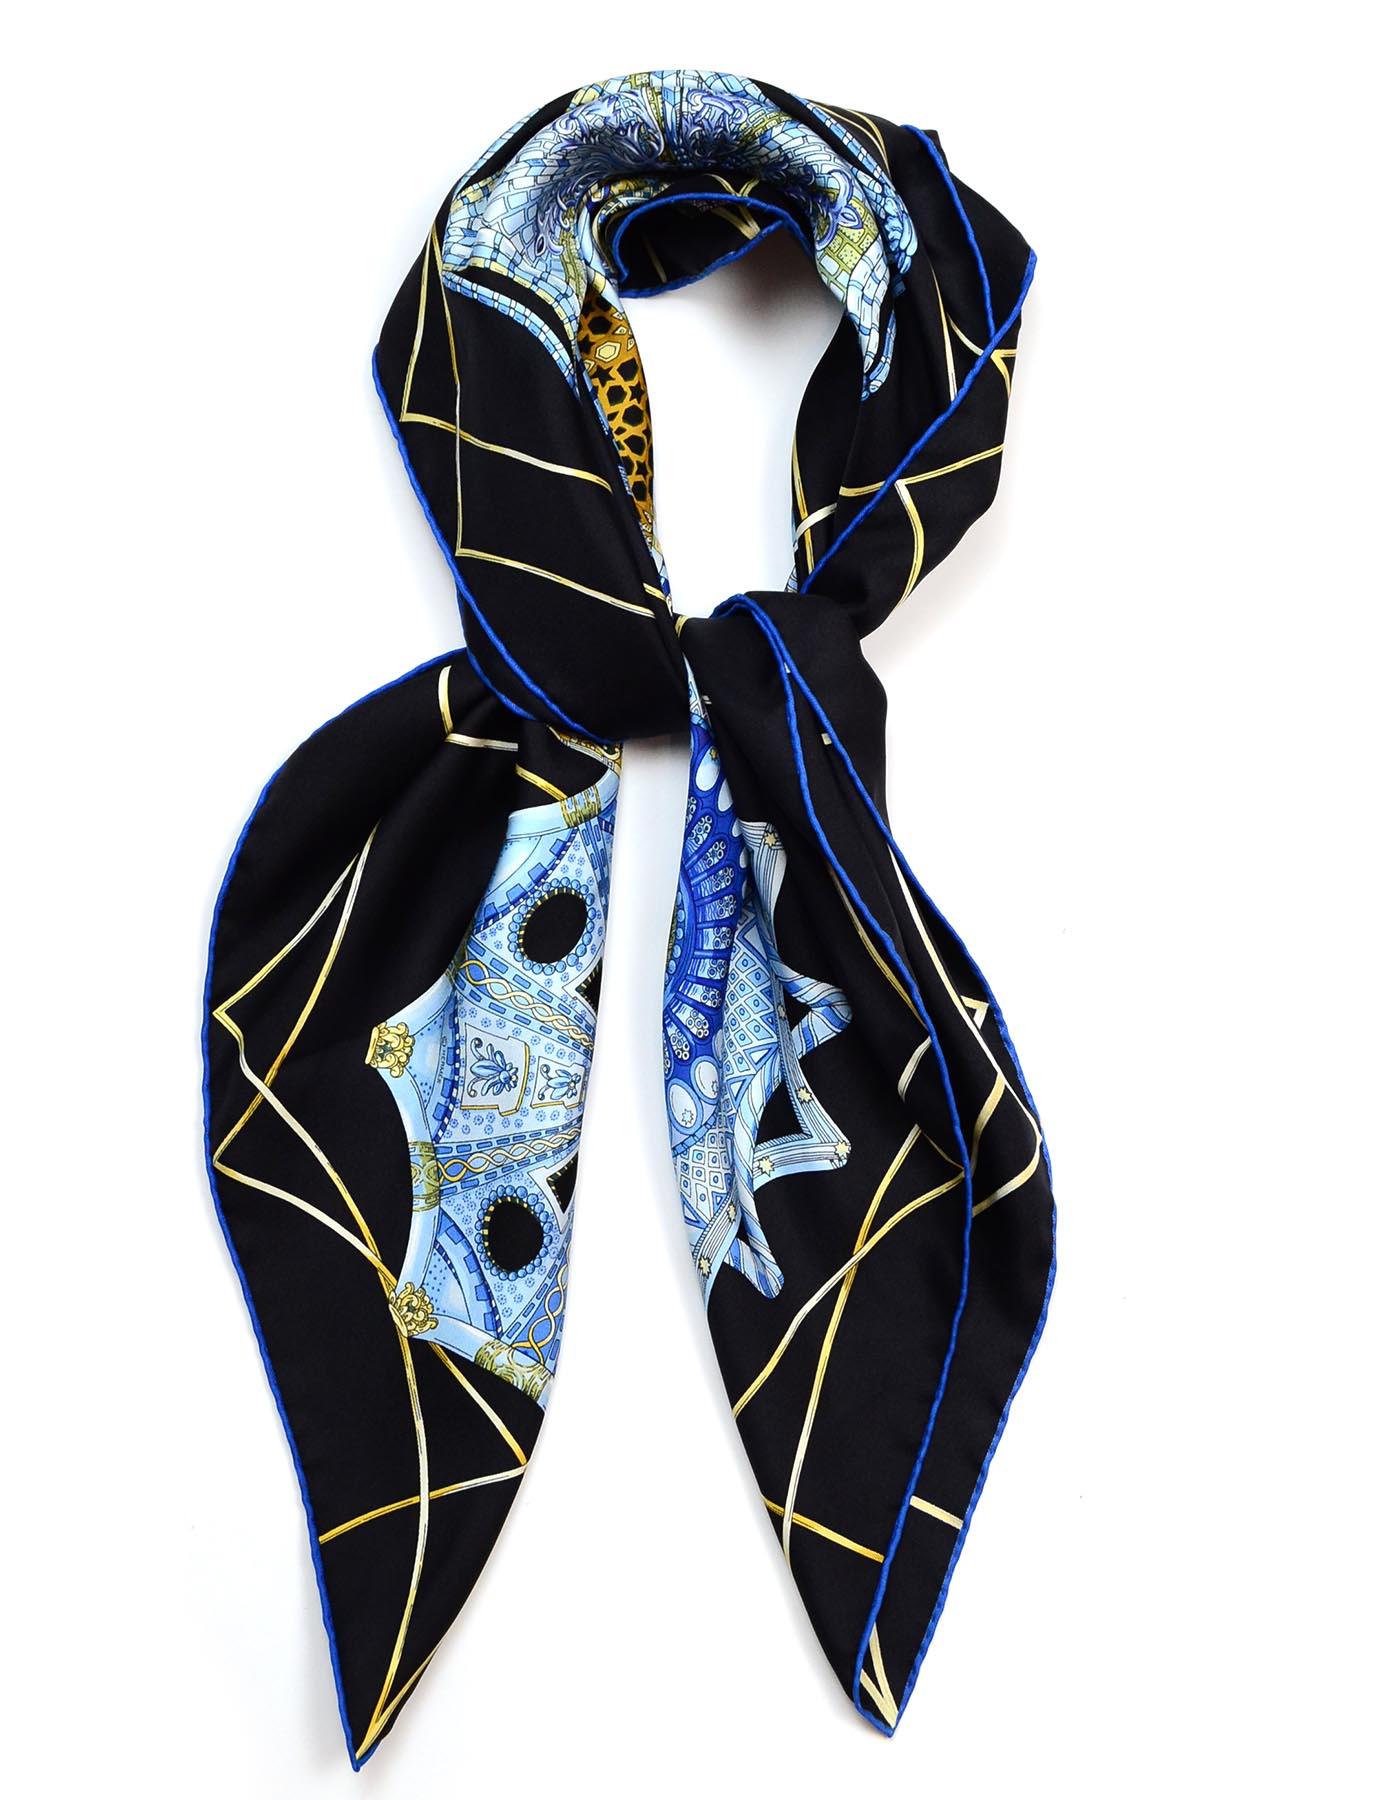 Hermes Black/Blue Collector's Les Domes Celestes by Annie Faivre 90CM Silk Scarf

Made In:  France
Color: Black/blue
Materials: 100% silk
Overall Condition: Excellent pre-owned condition
Estimated Retail: $395 + tax
Includes:  Hermes